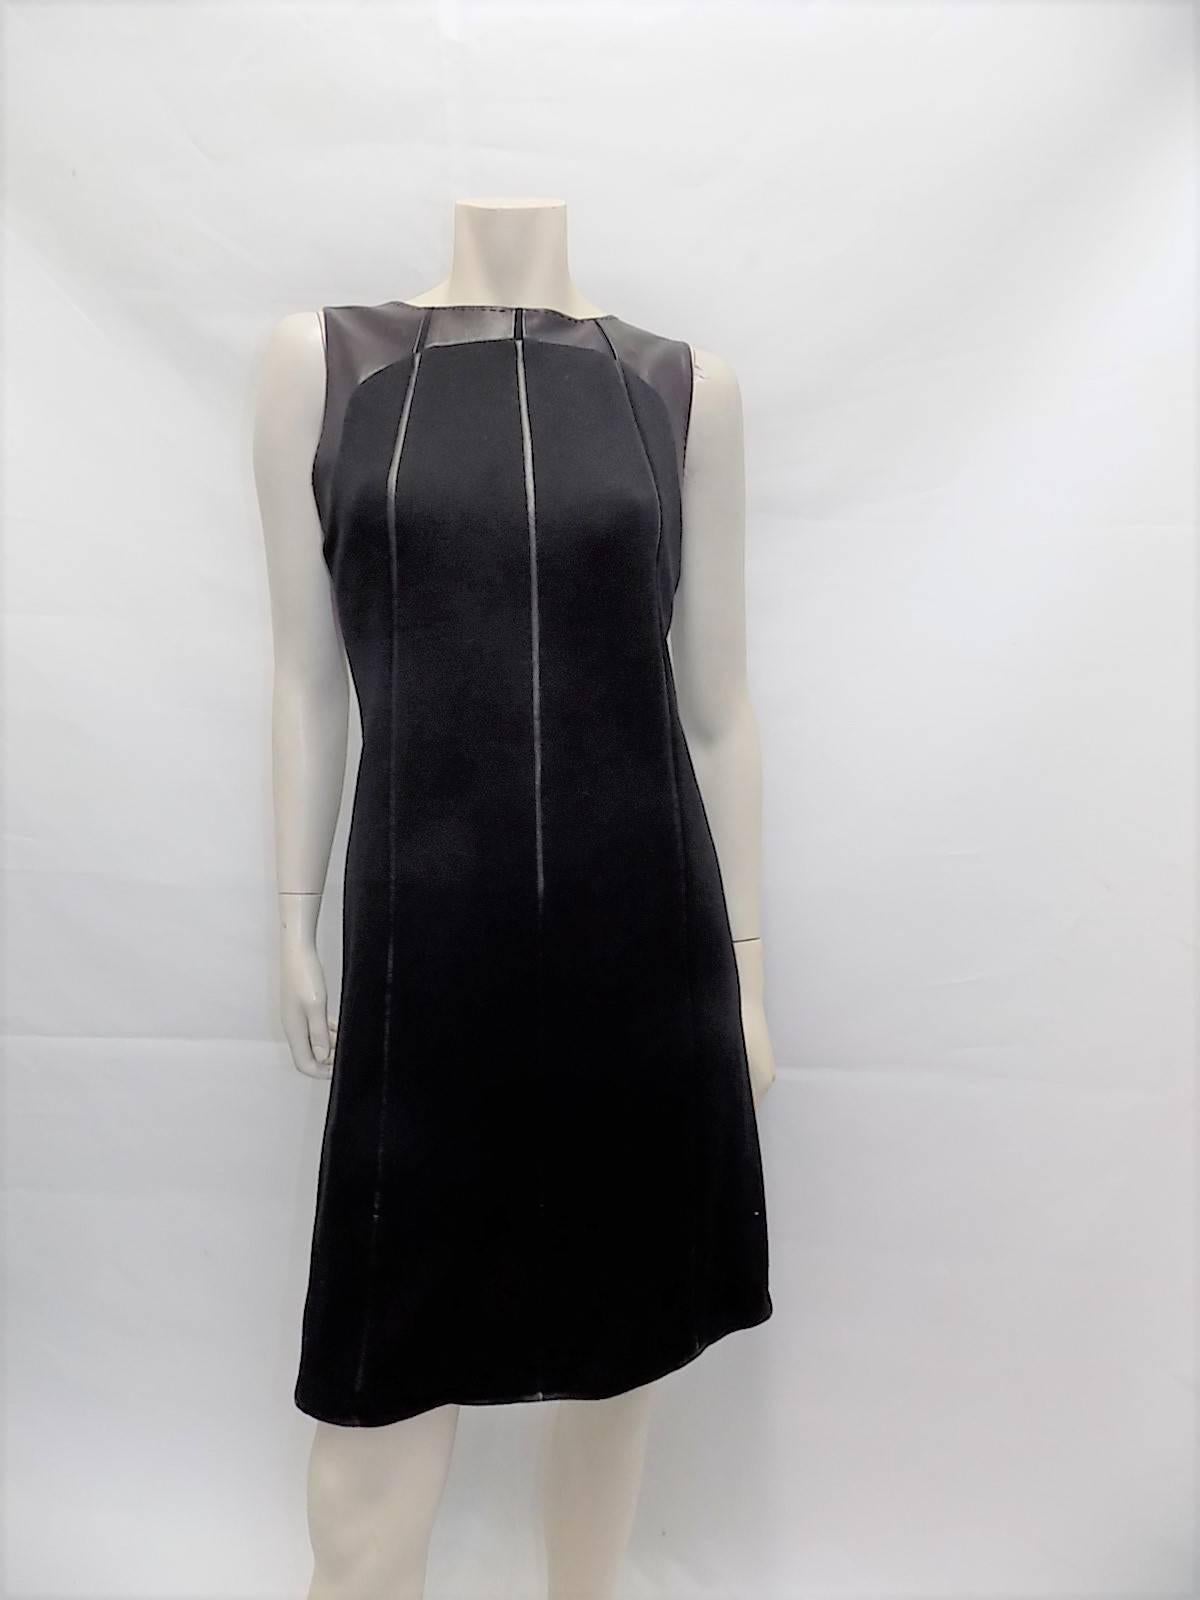 Ralph Rucci Chado Black Jersey dress with Leather Inserts Sz 12 In Excellent Condition For Sale In New York, NY